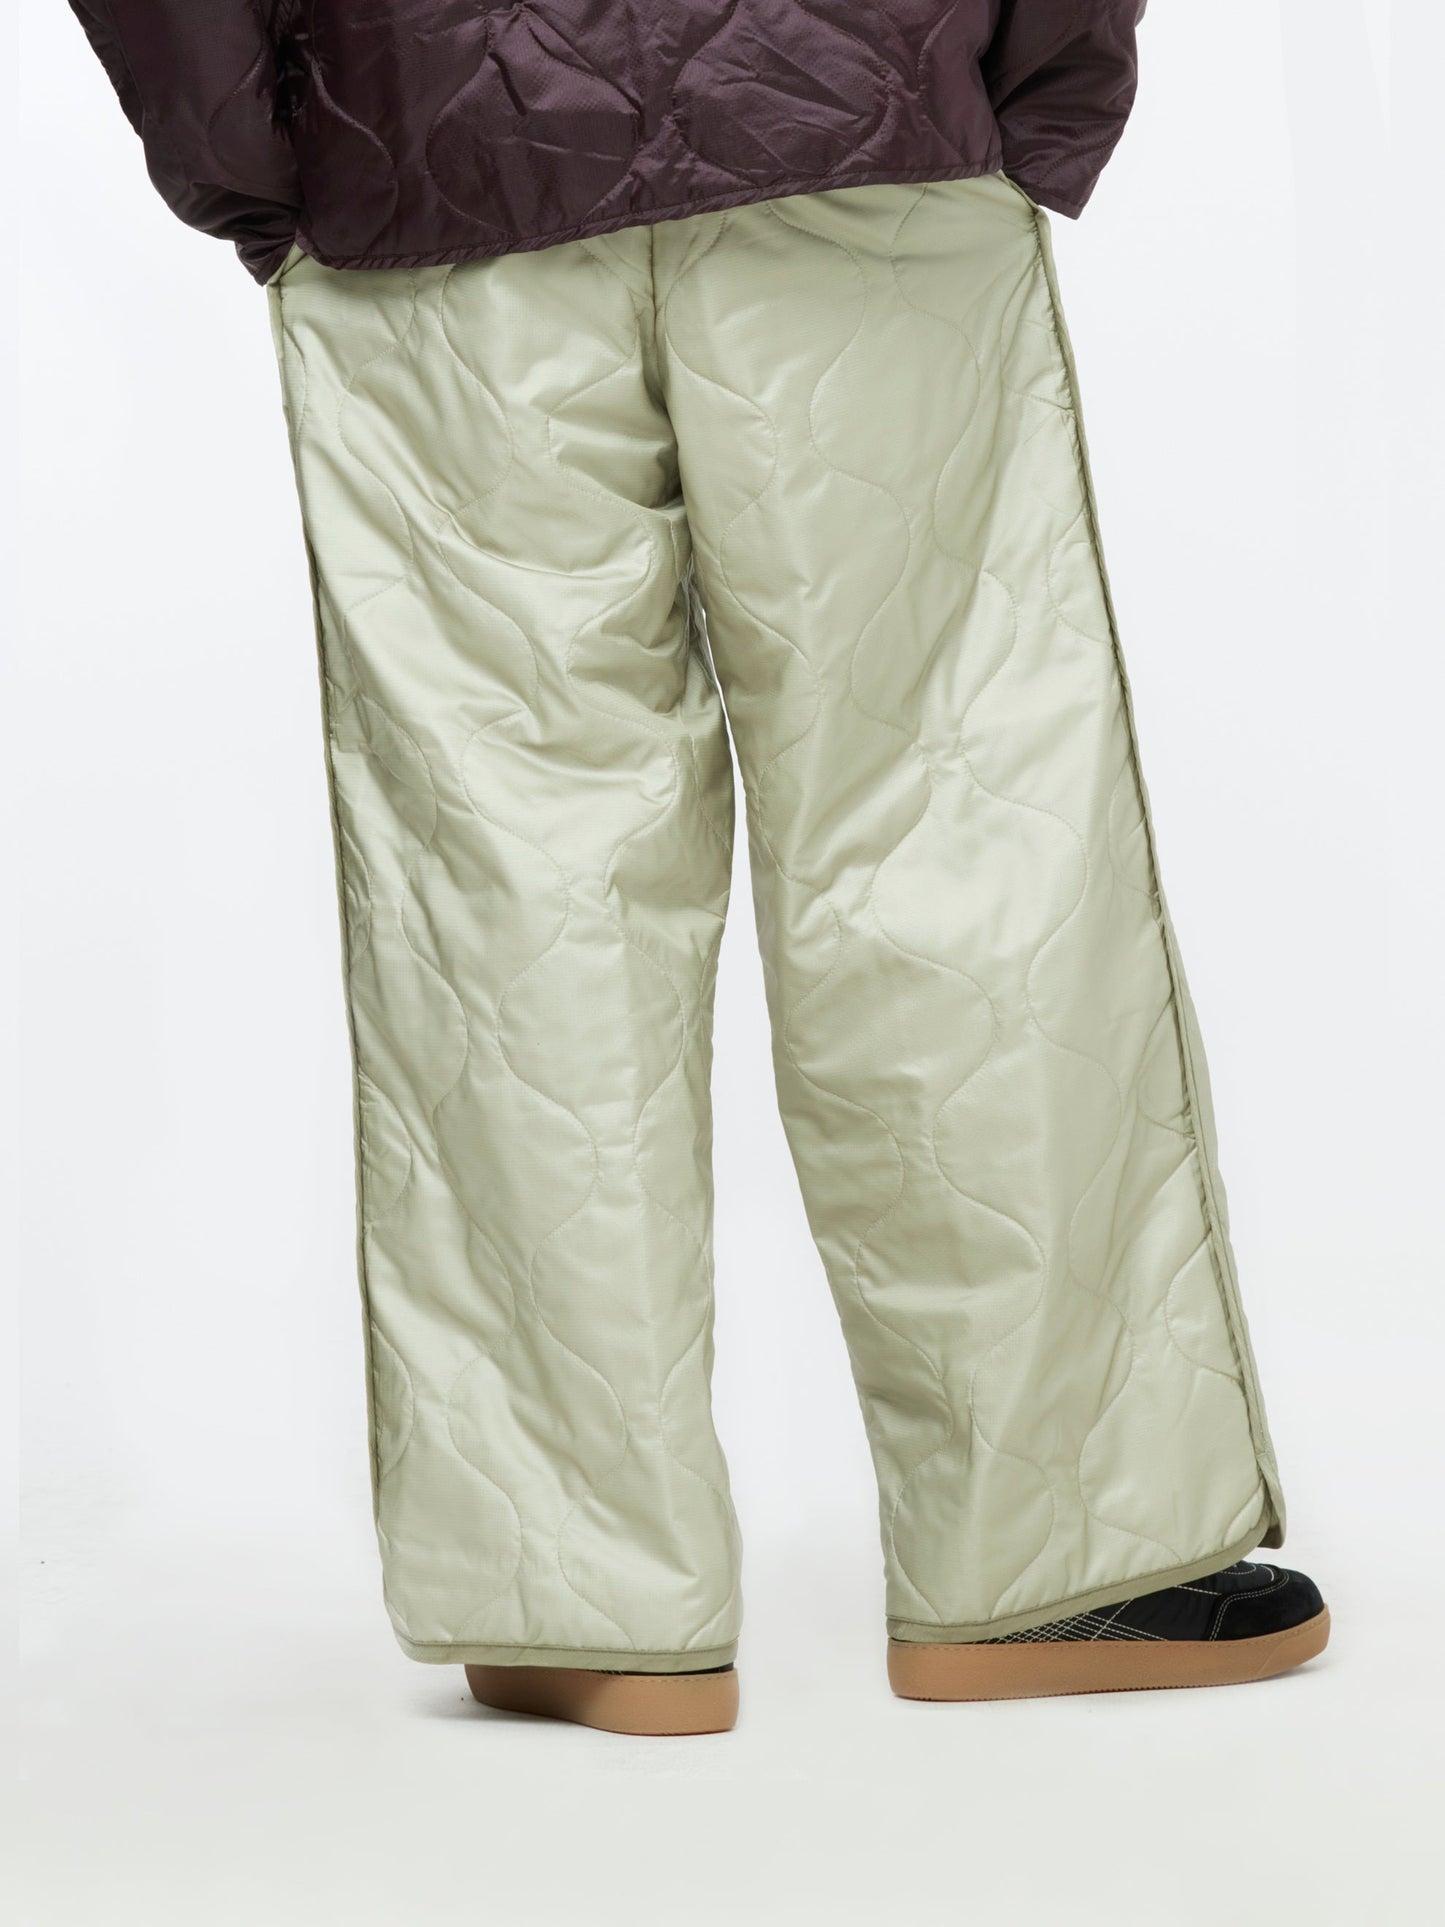 Pansbourg Ripsport Pants (Sand)